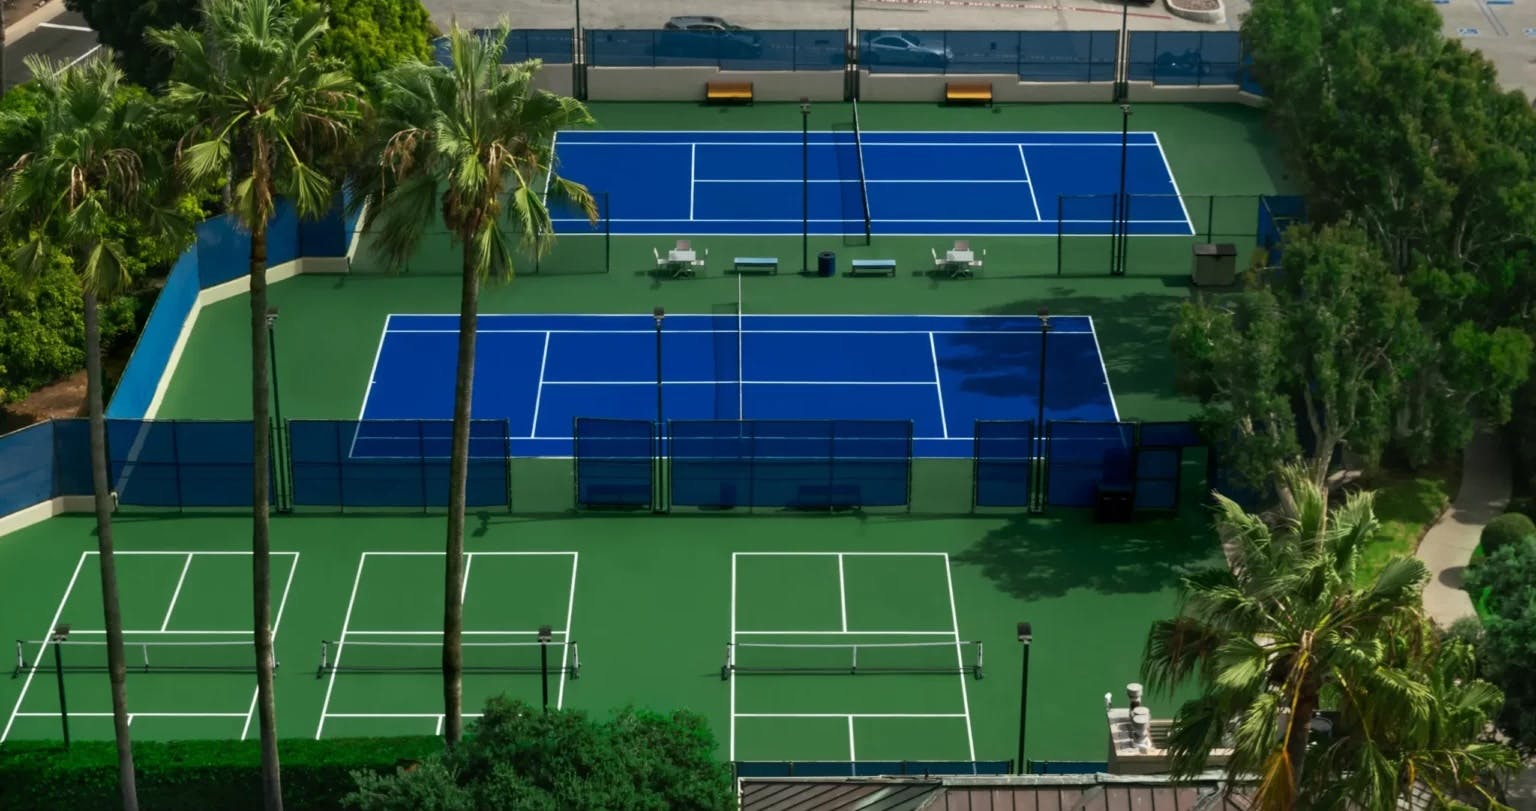 Image 1 of 7 of Marina Racquet Club at The Ritz-Carlton court